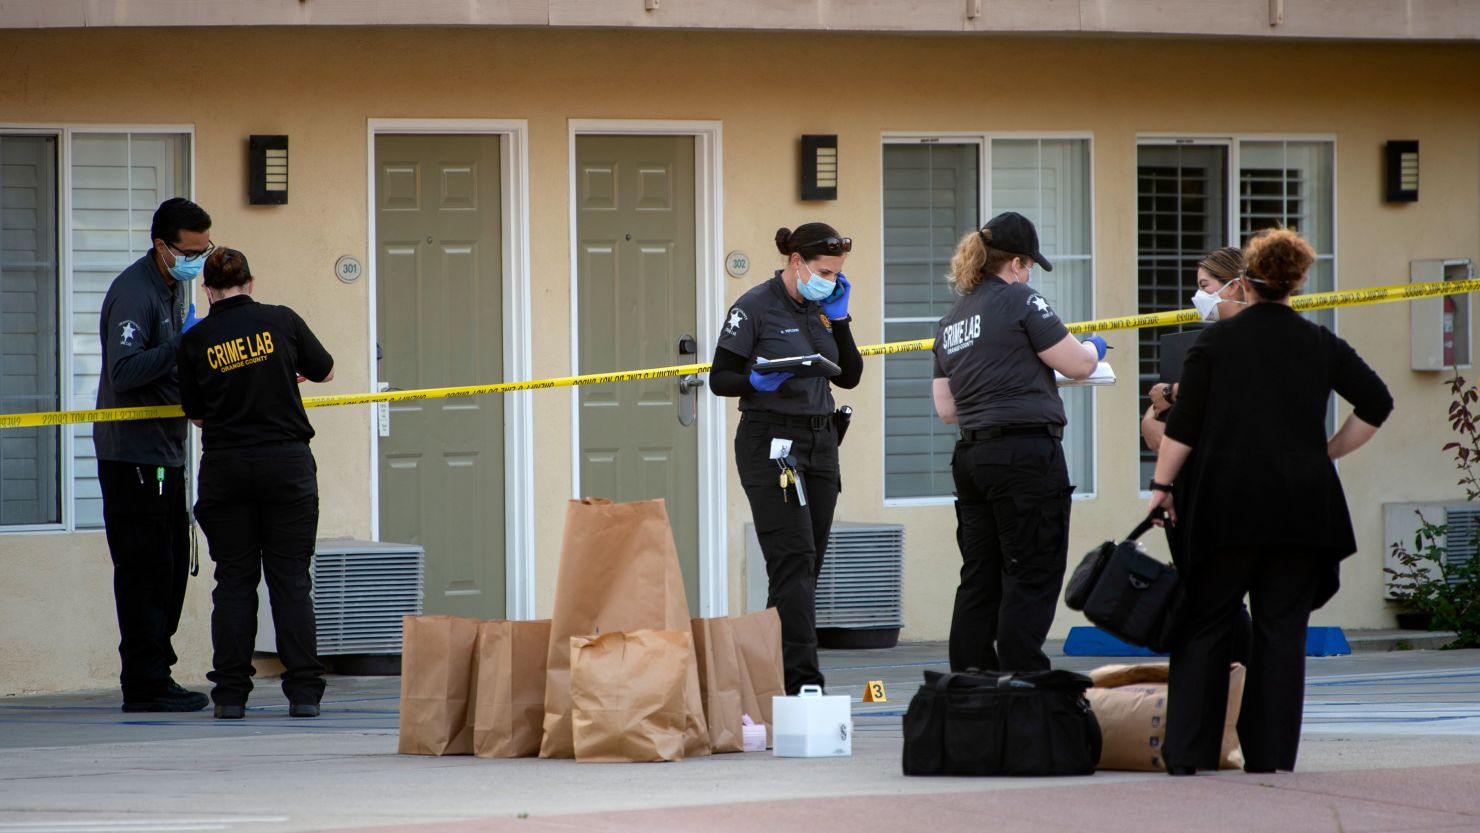 Investigators on scene Wednesday in San Clemente, California, after a sheriff's deputy fatally shot a Black homeless man.